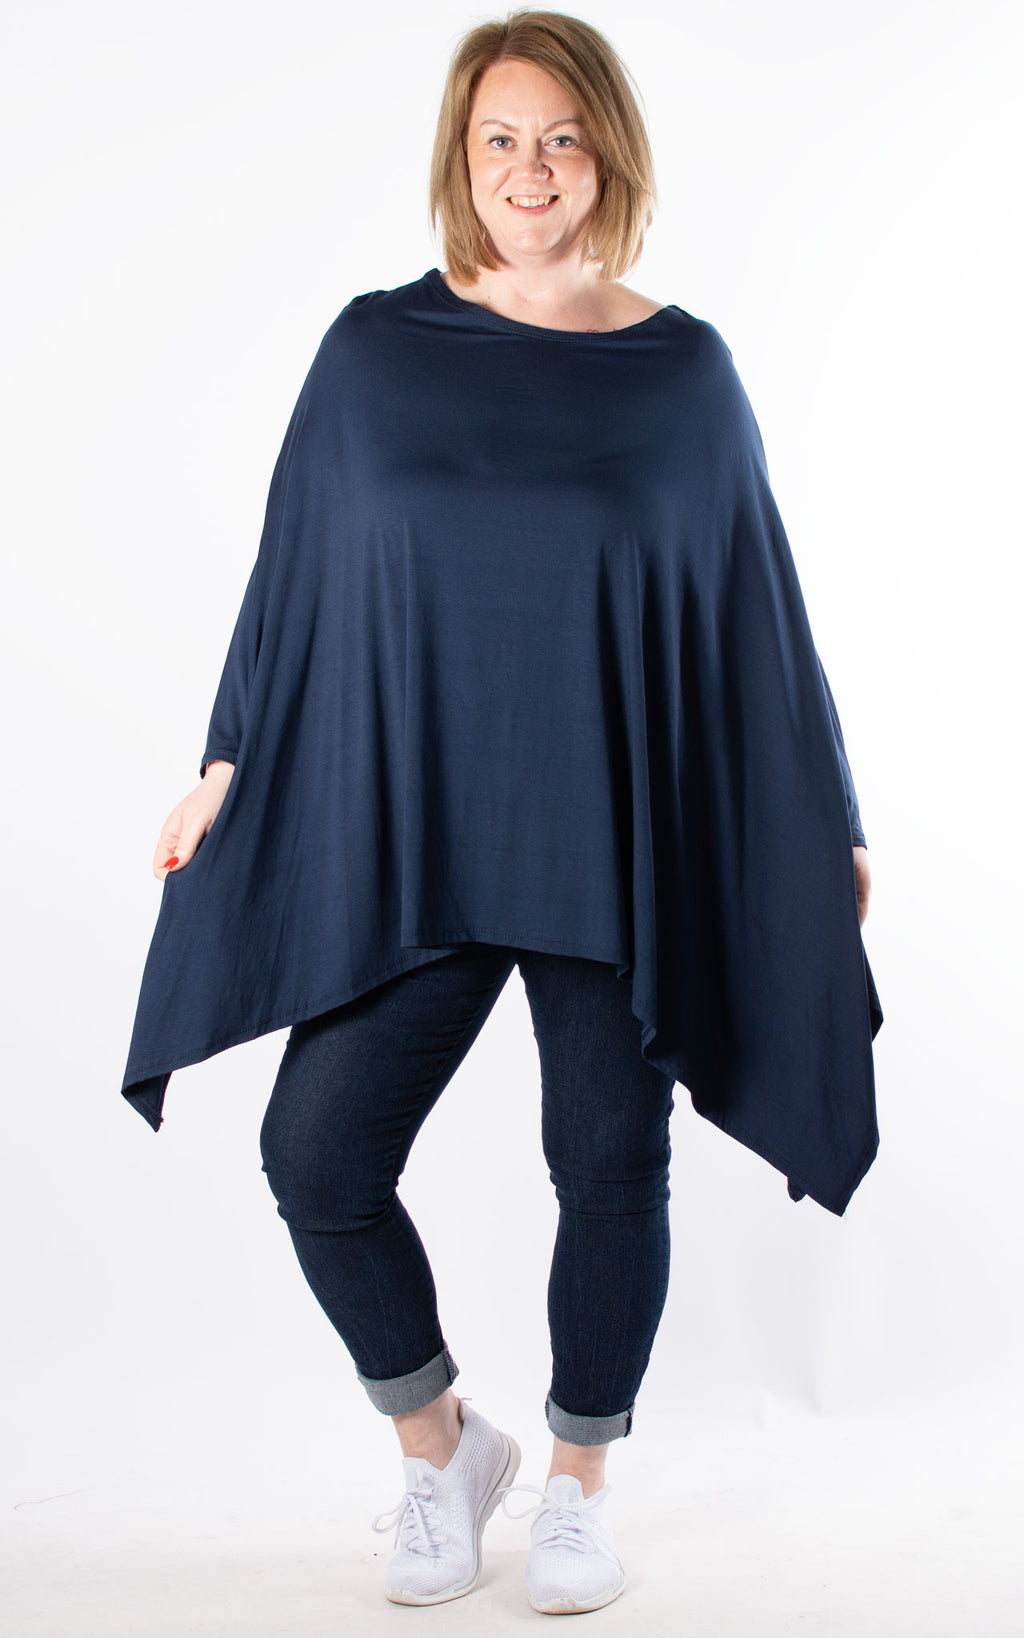 Carly Summer Top | Navy